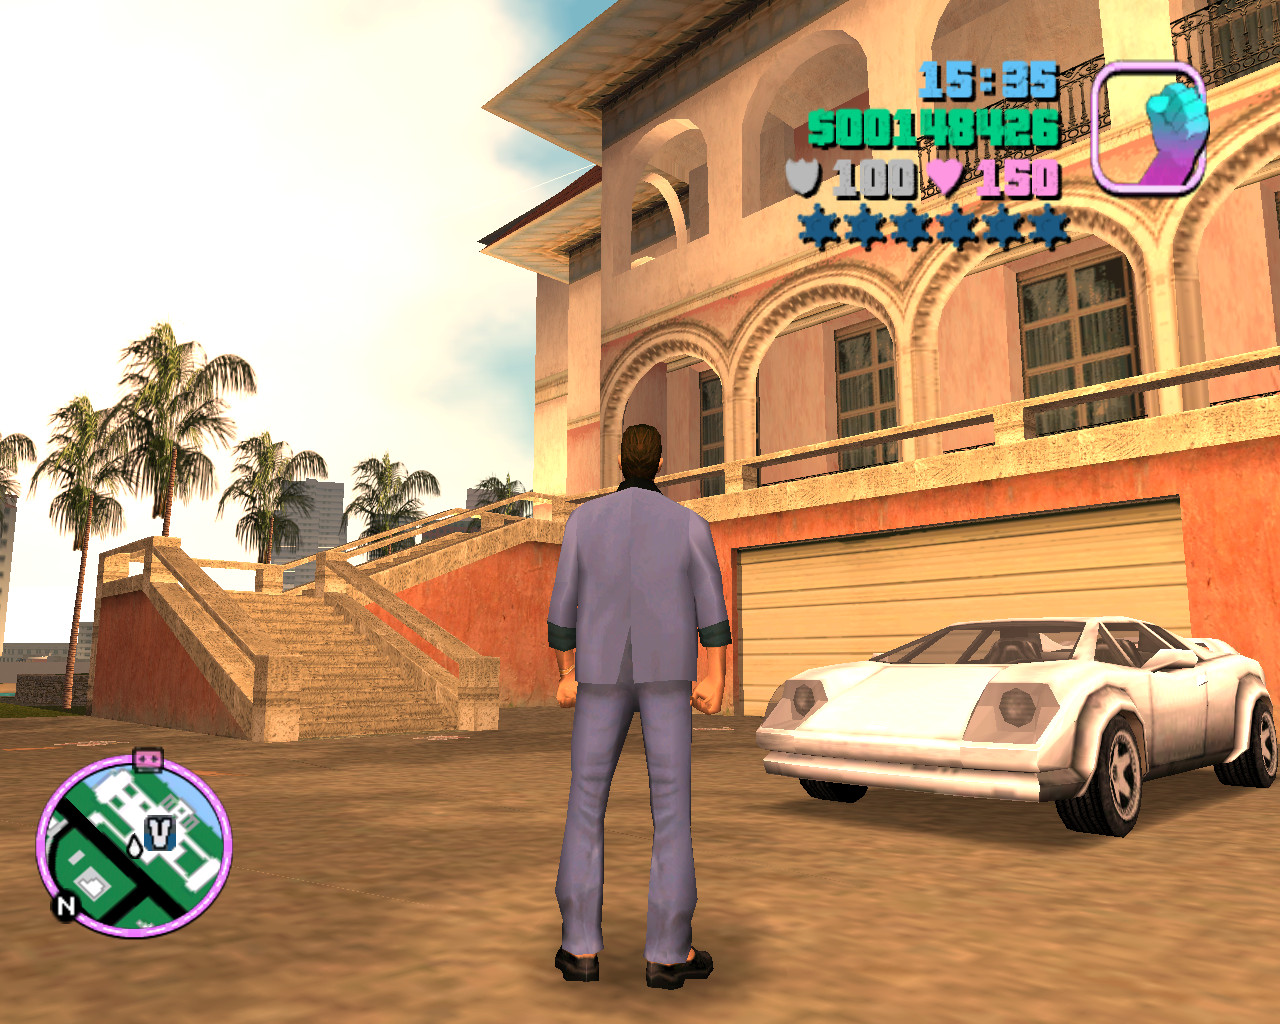 How Grand Theft Auto: Vice City Drastically Improved the Series